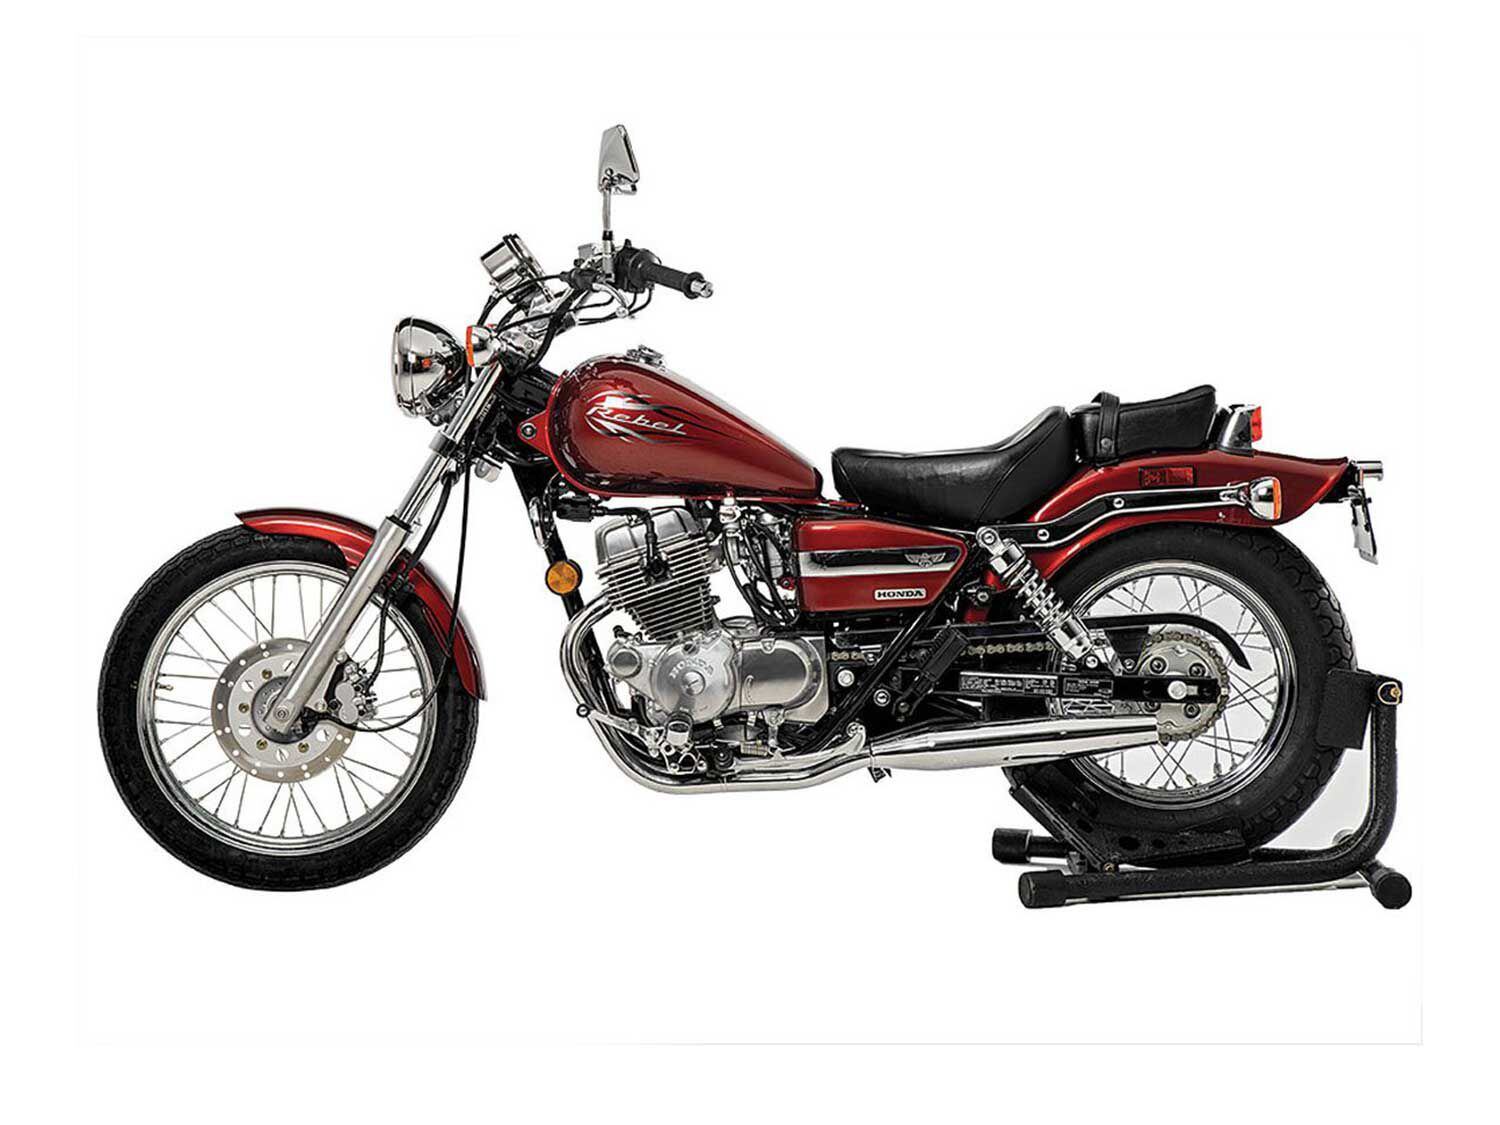 The original 234cc Rebel was a familiar sight at many motorcycle training courses.